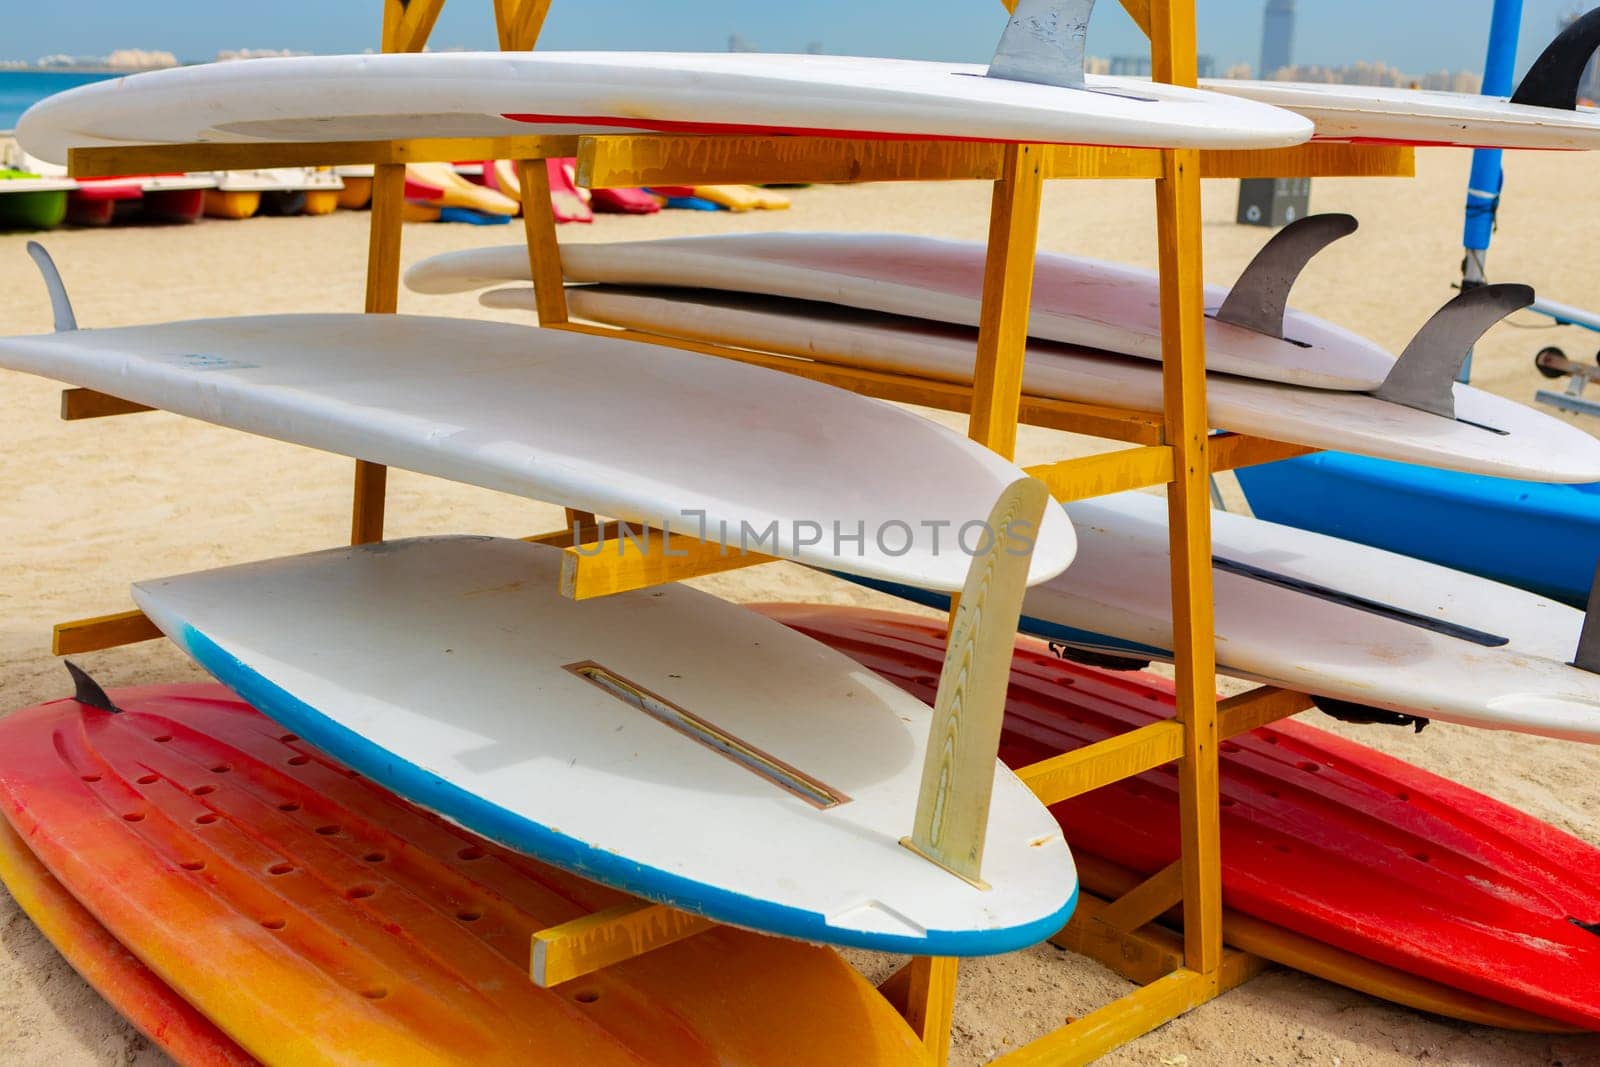 Surfboards stacked on the rack on a beach by Fabrikasimf